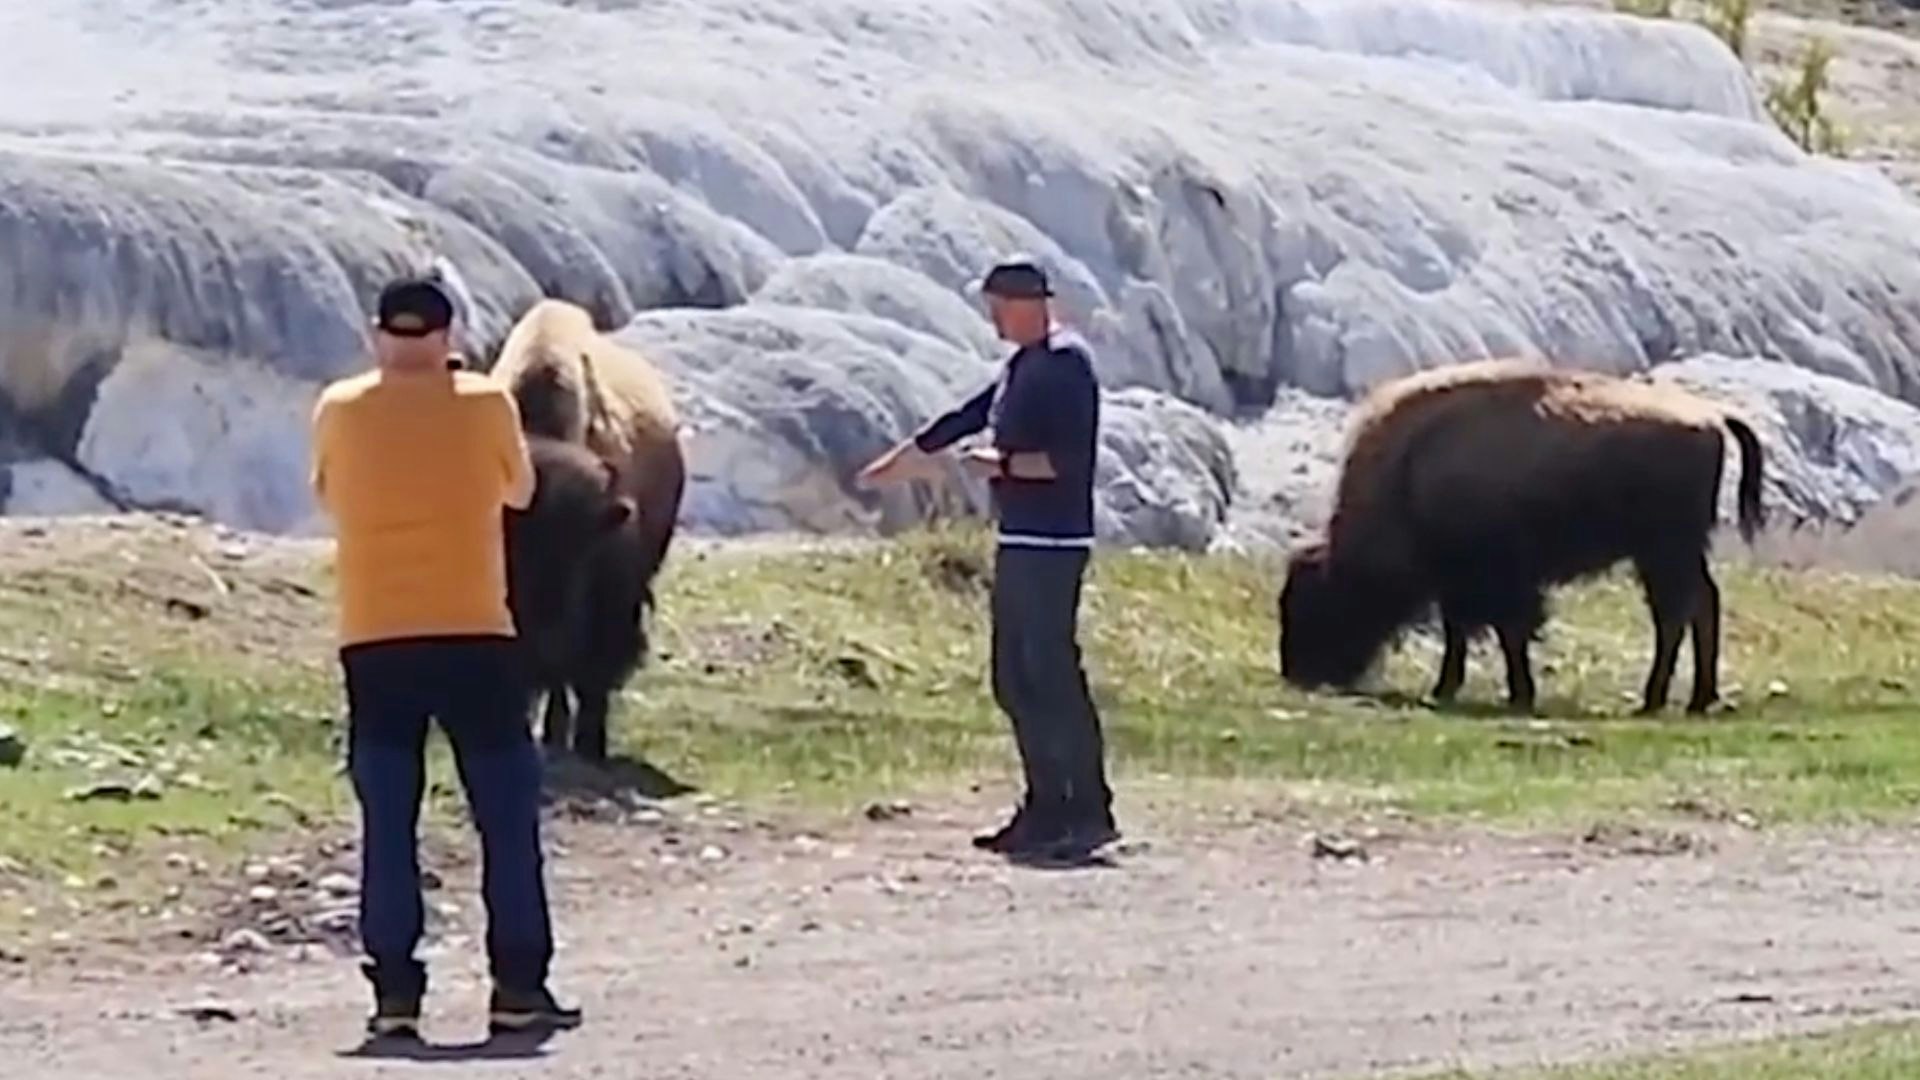 It hasn't been a week since Yellowstone National Park opened and someone has captured tourists dangerously approaching a pair of bison.